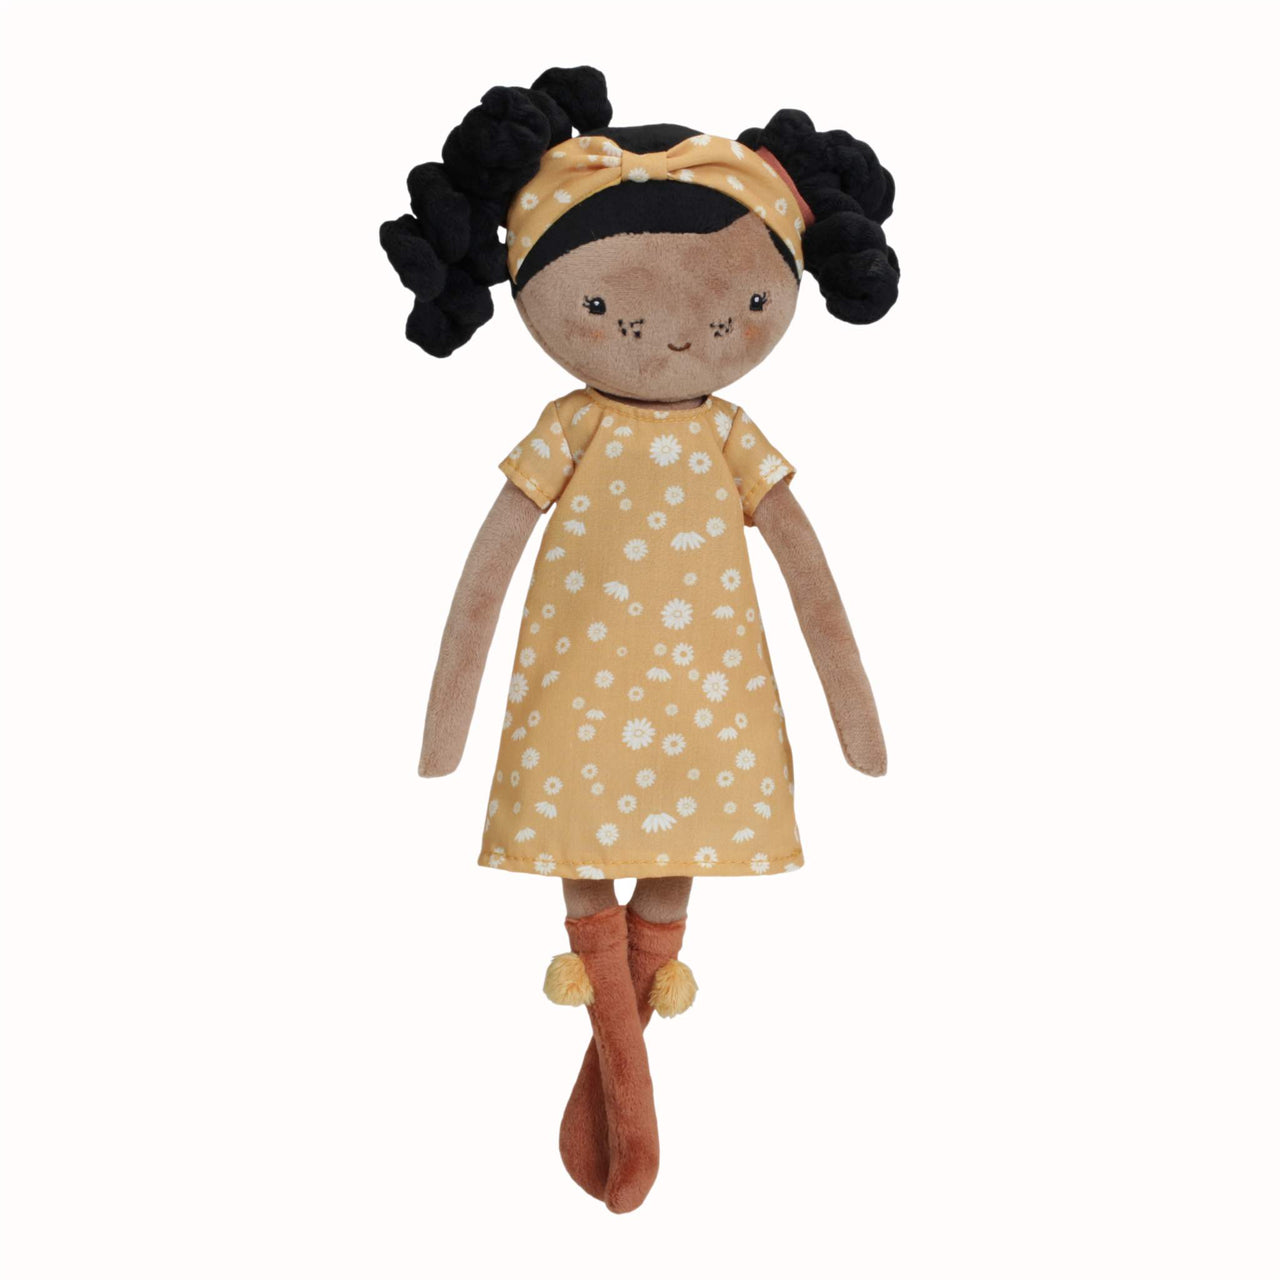 Meet lovely Evi. This plush cuddle doll from Little Dutch in a cute dress wants to be cuddled. Doll Evi is 35 cm tall. Evi can sit up and likes to go with you in the Little Dutch wooden doll stroller. The doll comes in a beautiful storage box.